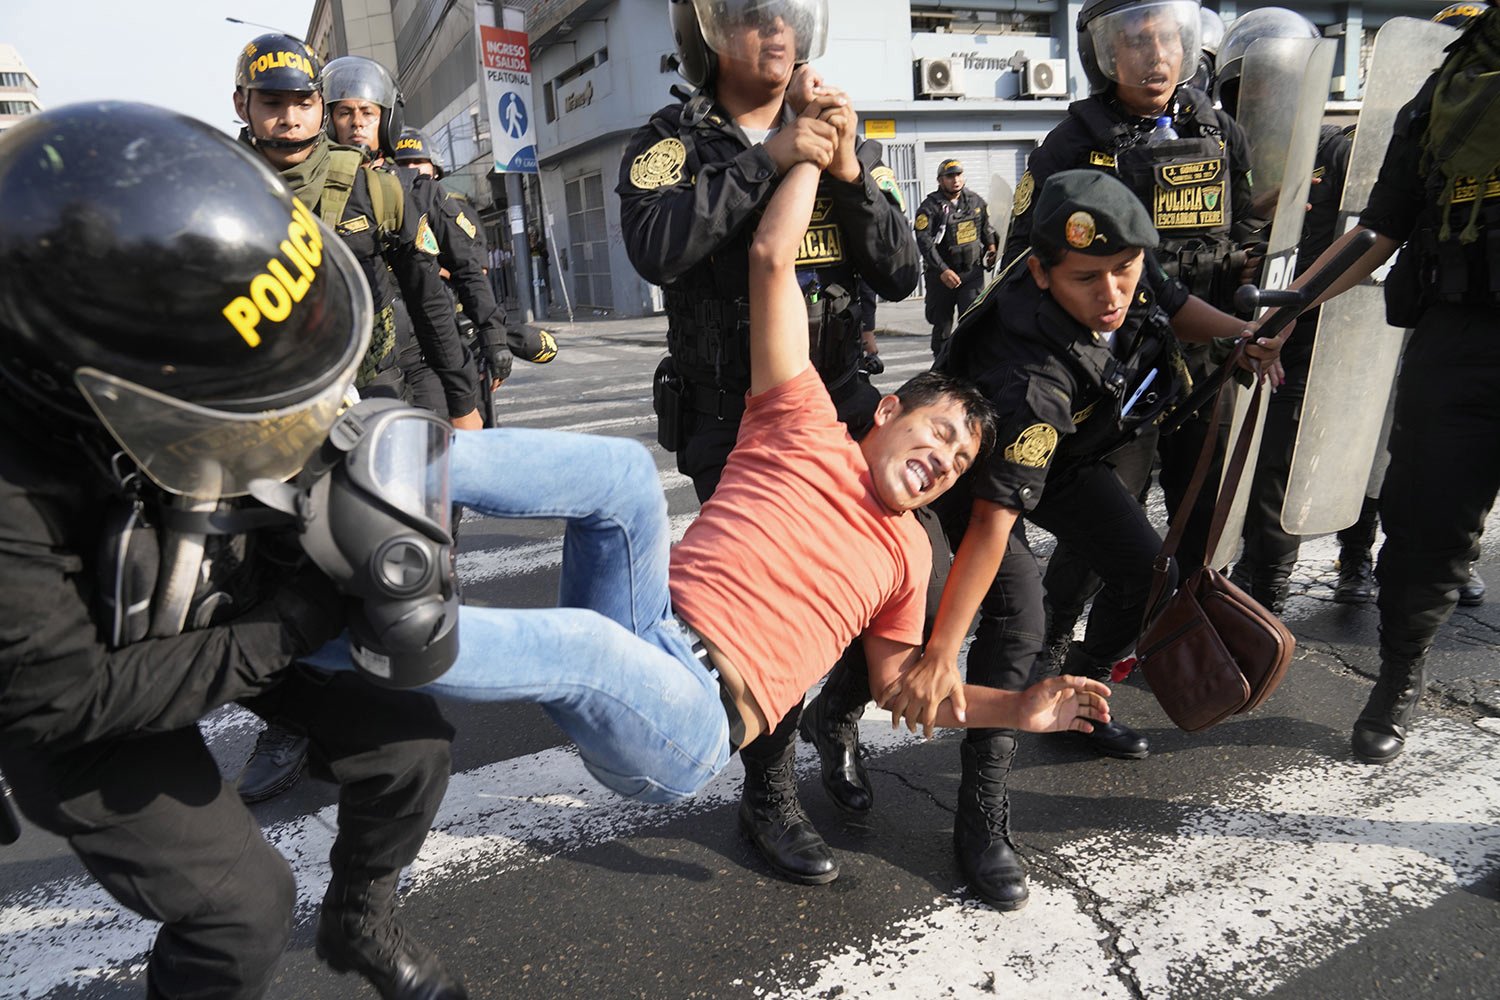  Police detain an anti-government protester during a demonstration against Peruvian President Dina Boluarte in Lima, Peru, Jan. 19, 2023. Protesters are seeking immediate elections, Boluarte's resignation, the release of ousted President Pedro Castil